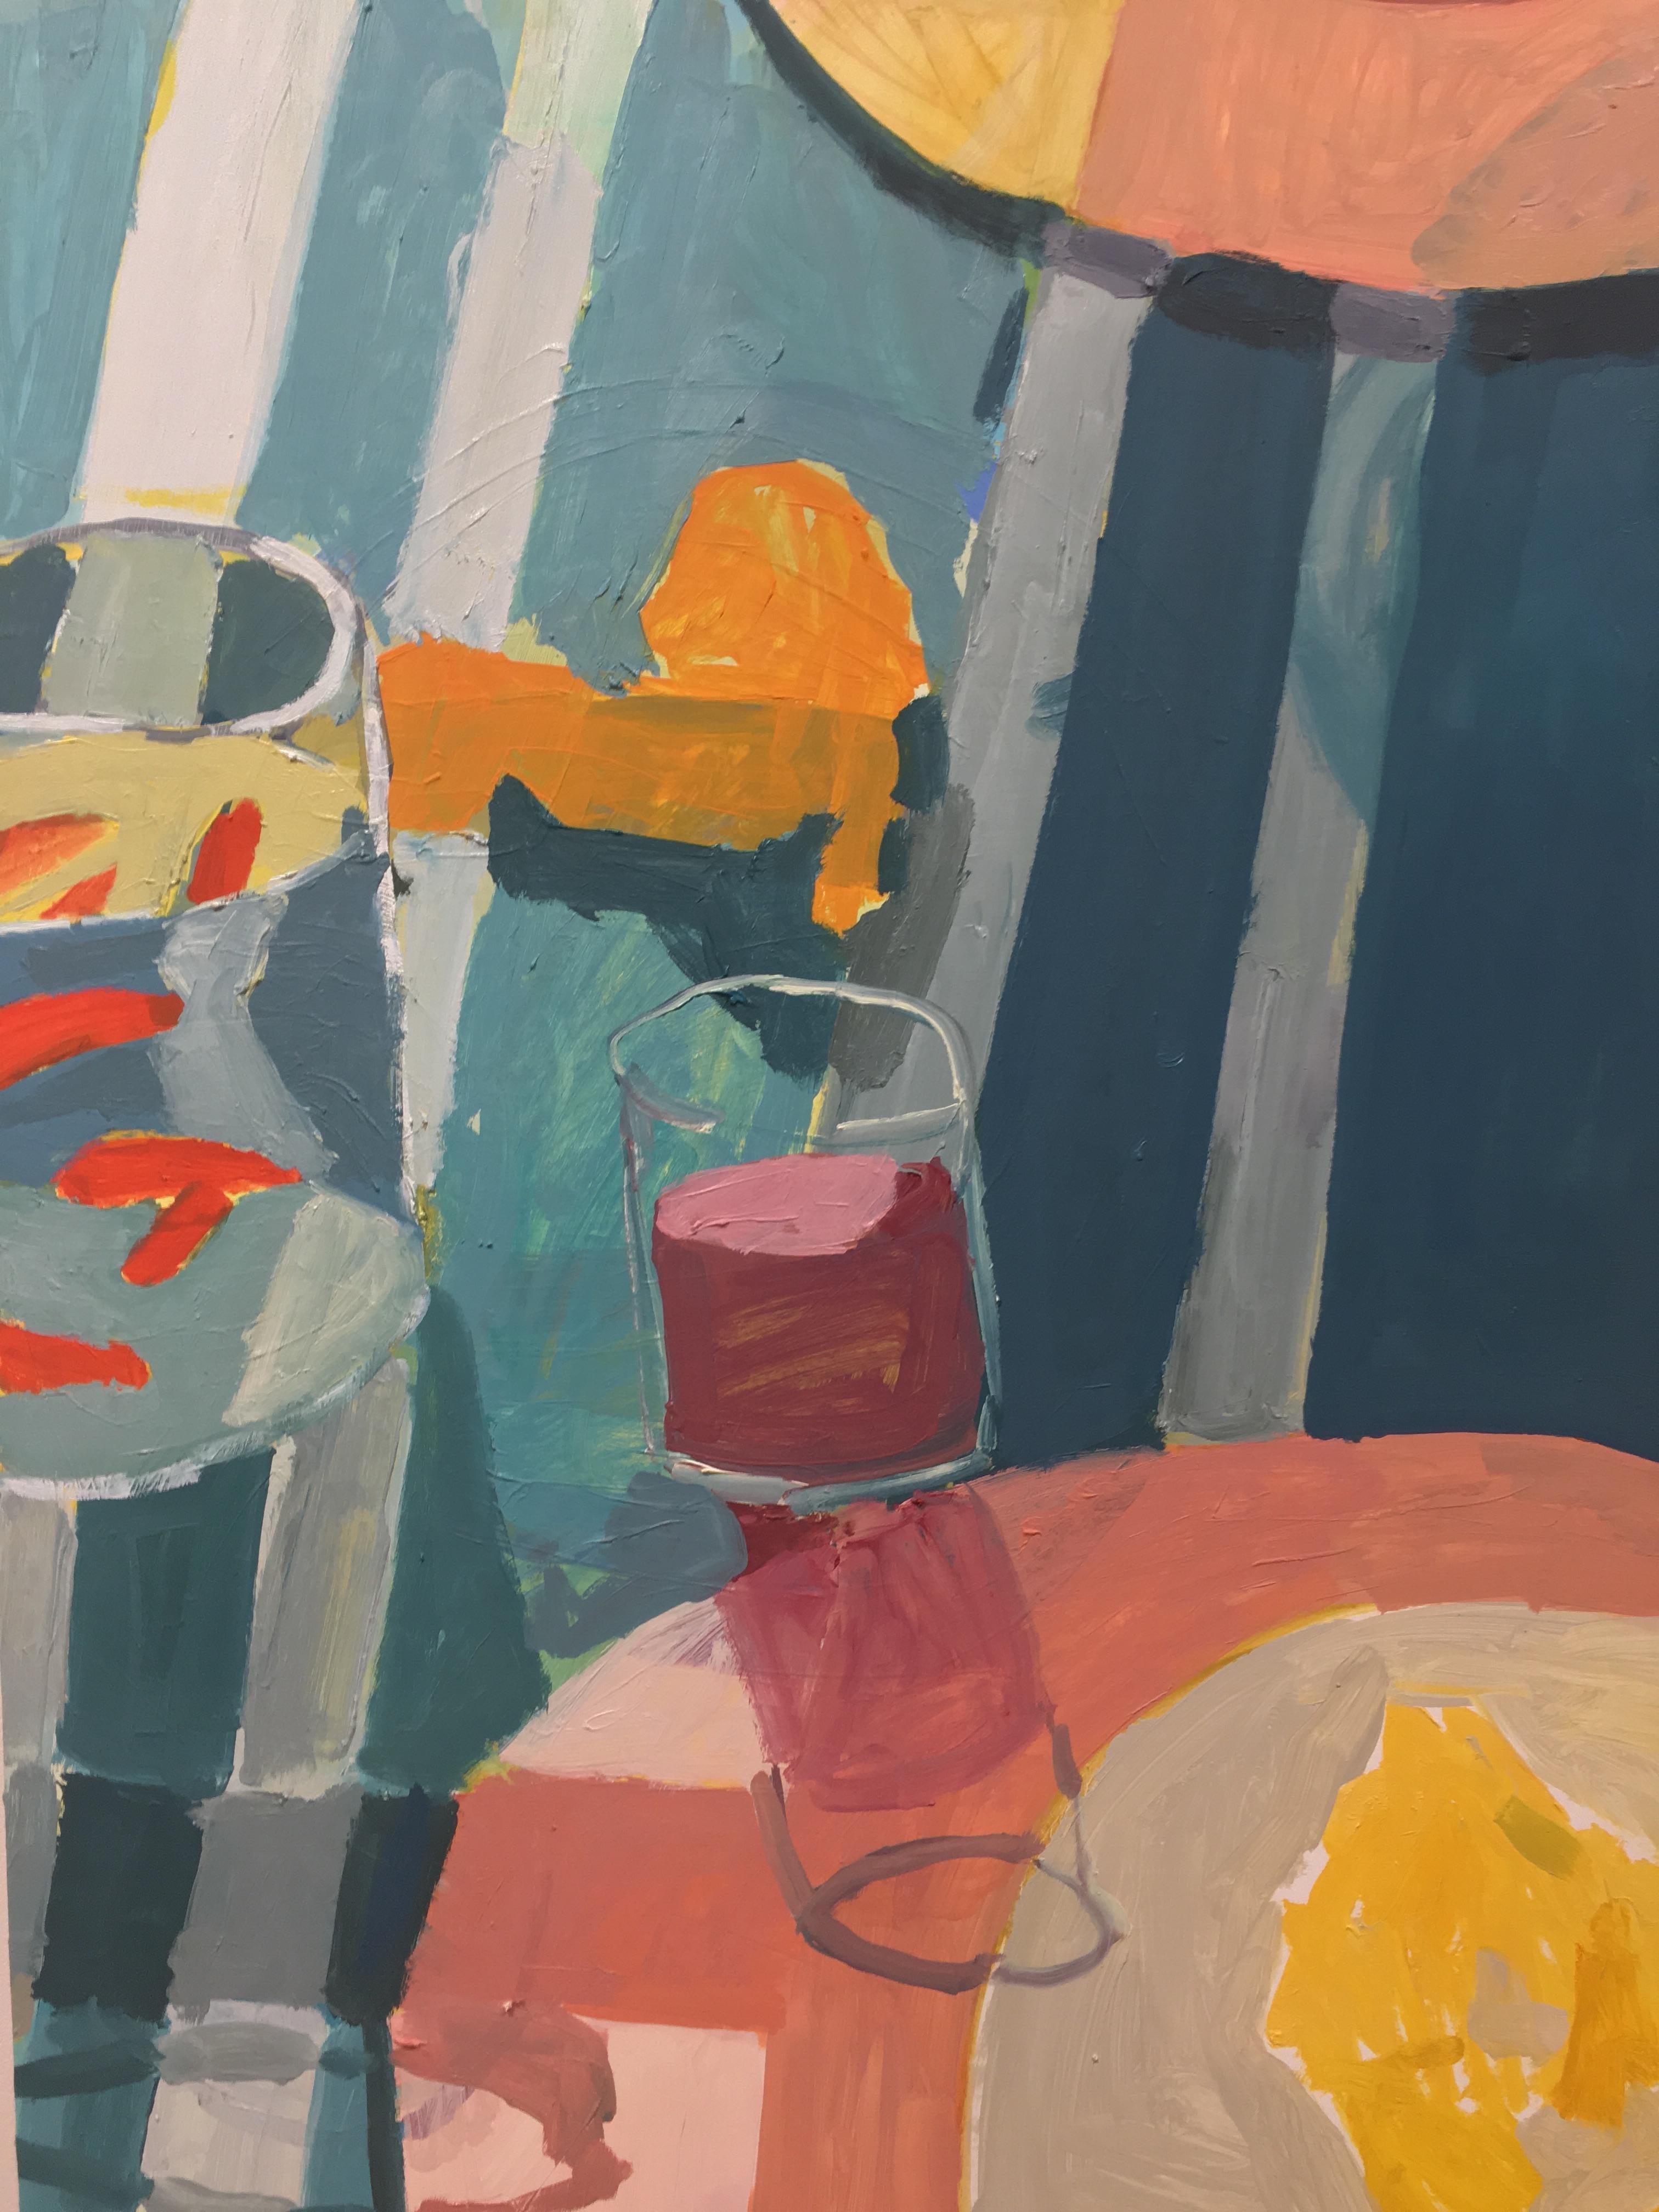 Bright colors and playful patterns are dynamic and full of life in this cheerful still life painting by Virginia artist Sophie Treppendahl. Sunlight illuminates a colorful table set with a Mexican breakfast, the setting alluded to in the painting's